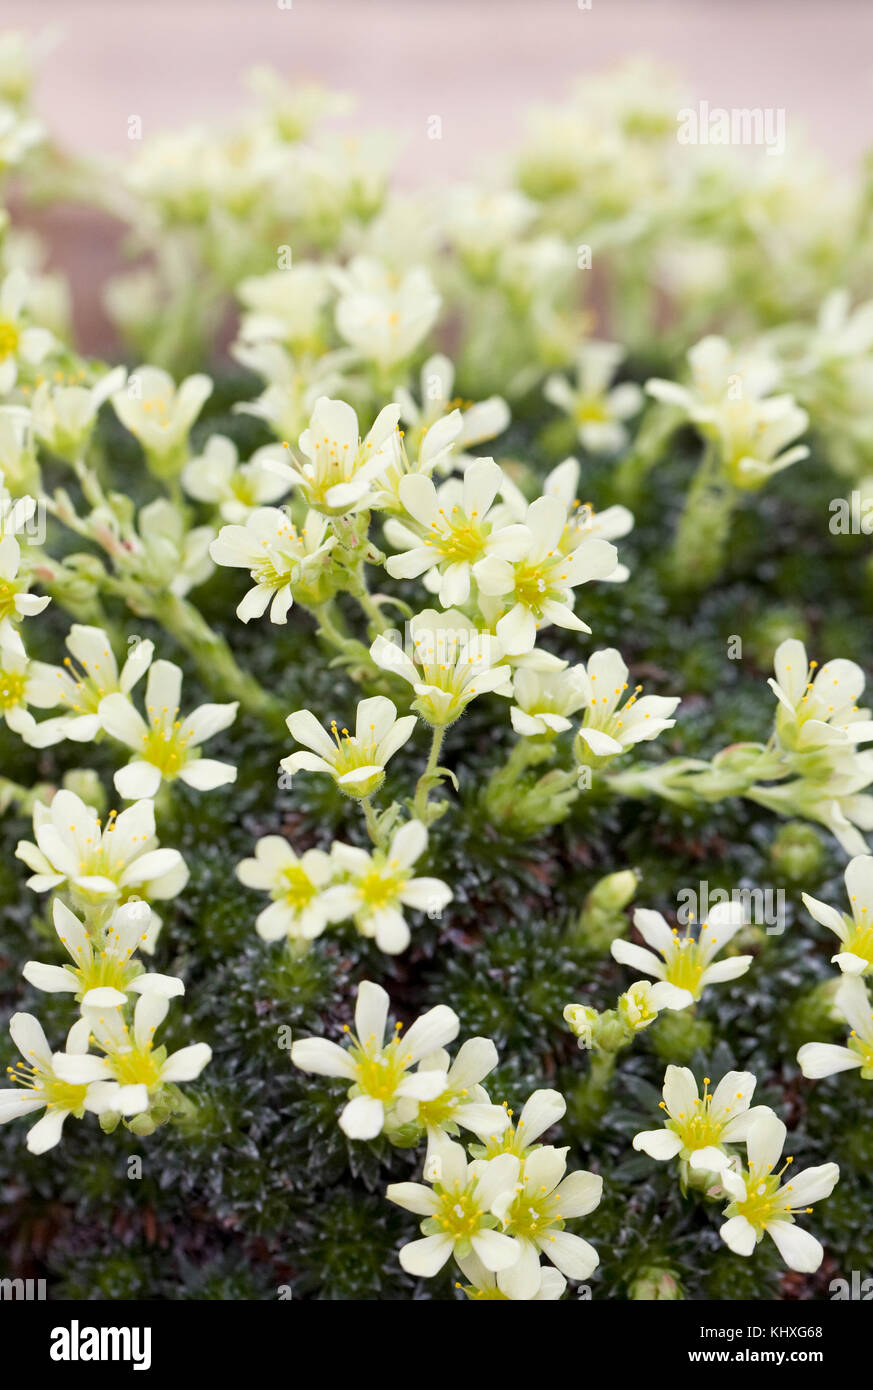 Saxifraga 'Spartakus' flowers growing in a protected environment. Stock Photo